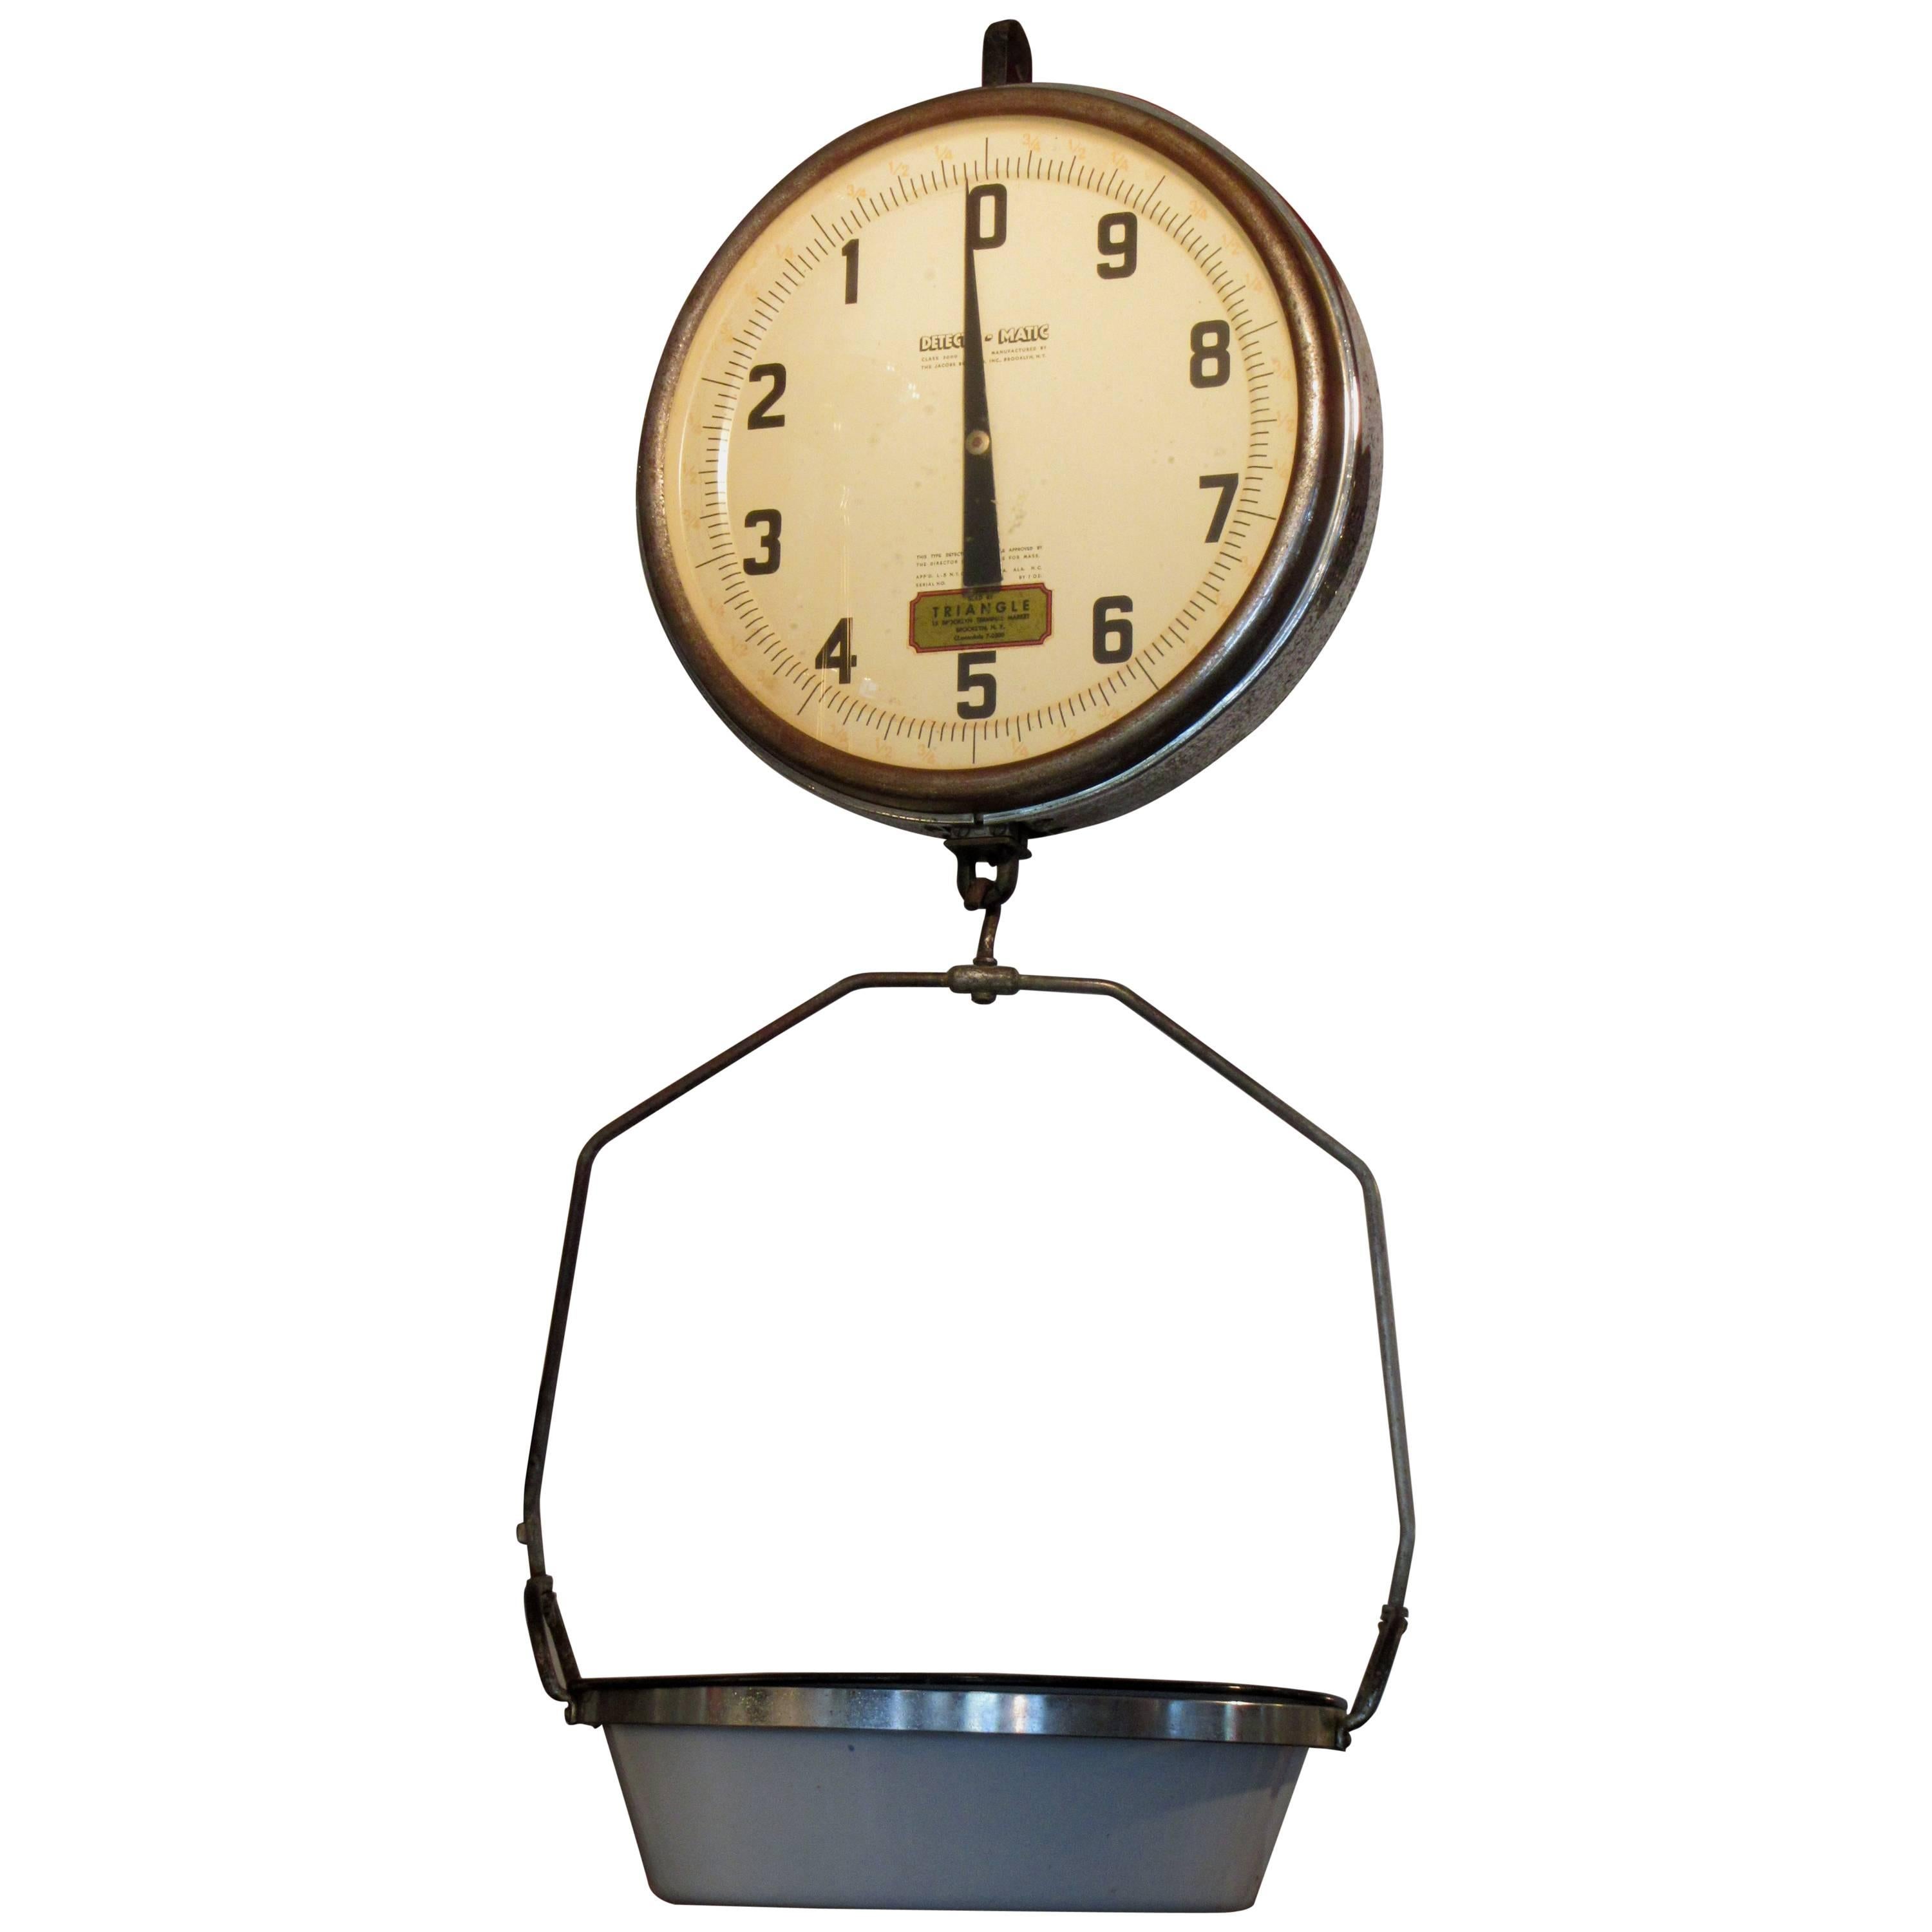 1960s Detecto Matic Hanging Scale